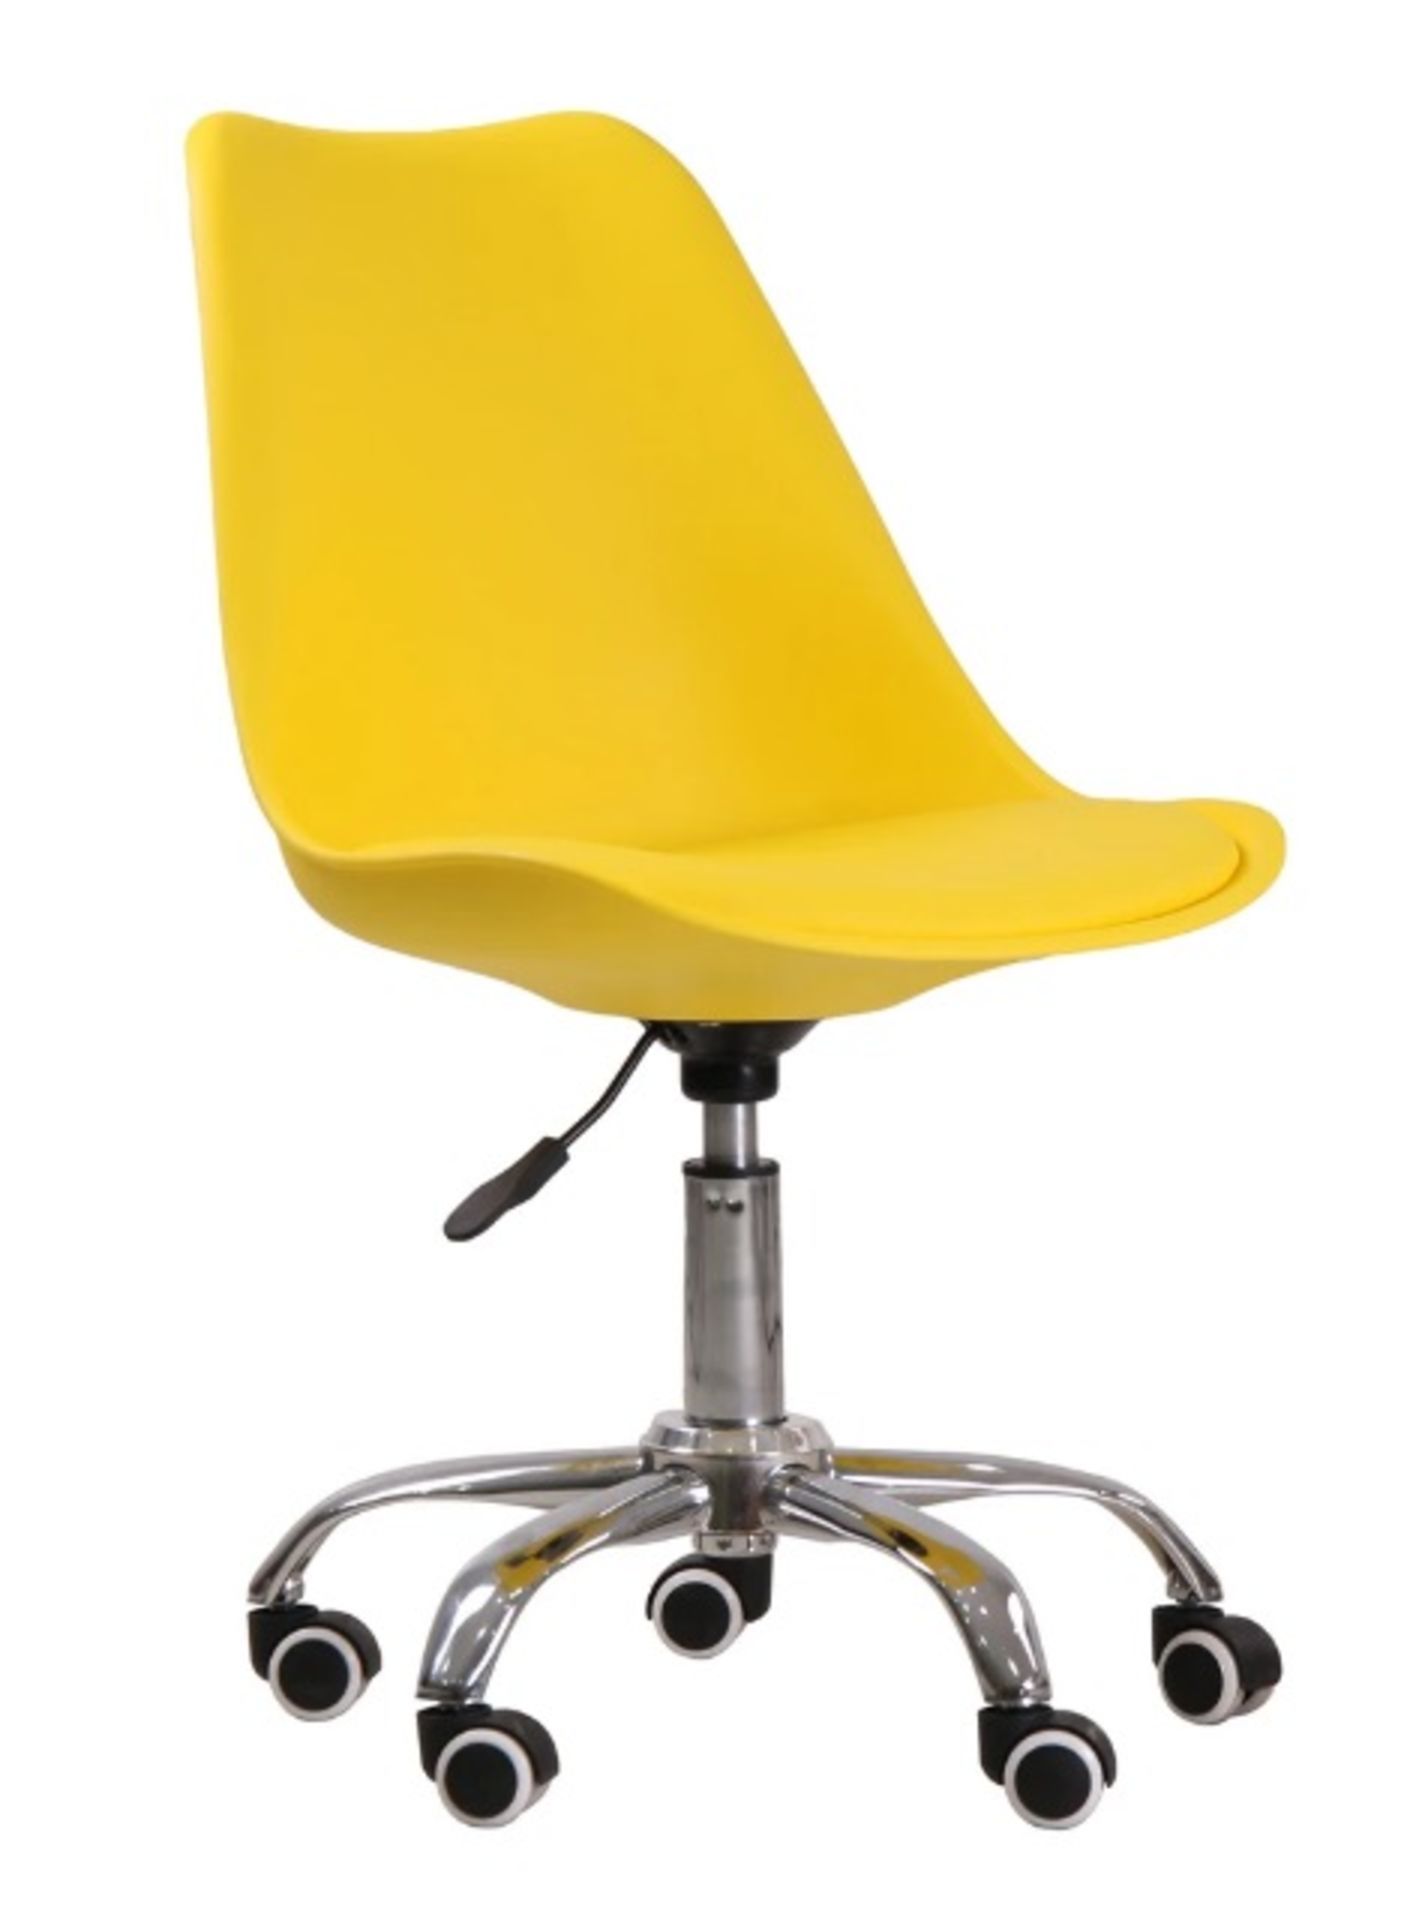 1 x Contemporary Adjustable Hydraulic Office Swivel Chair In Yellow With Chrome Base On Castors - Image 2 of 4